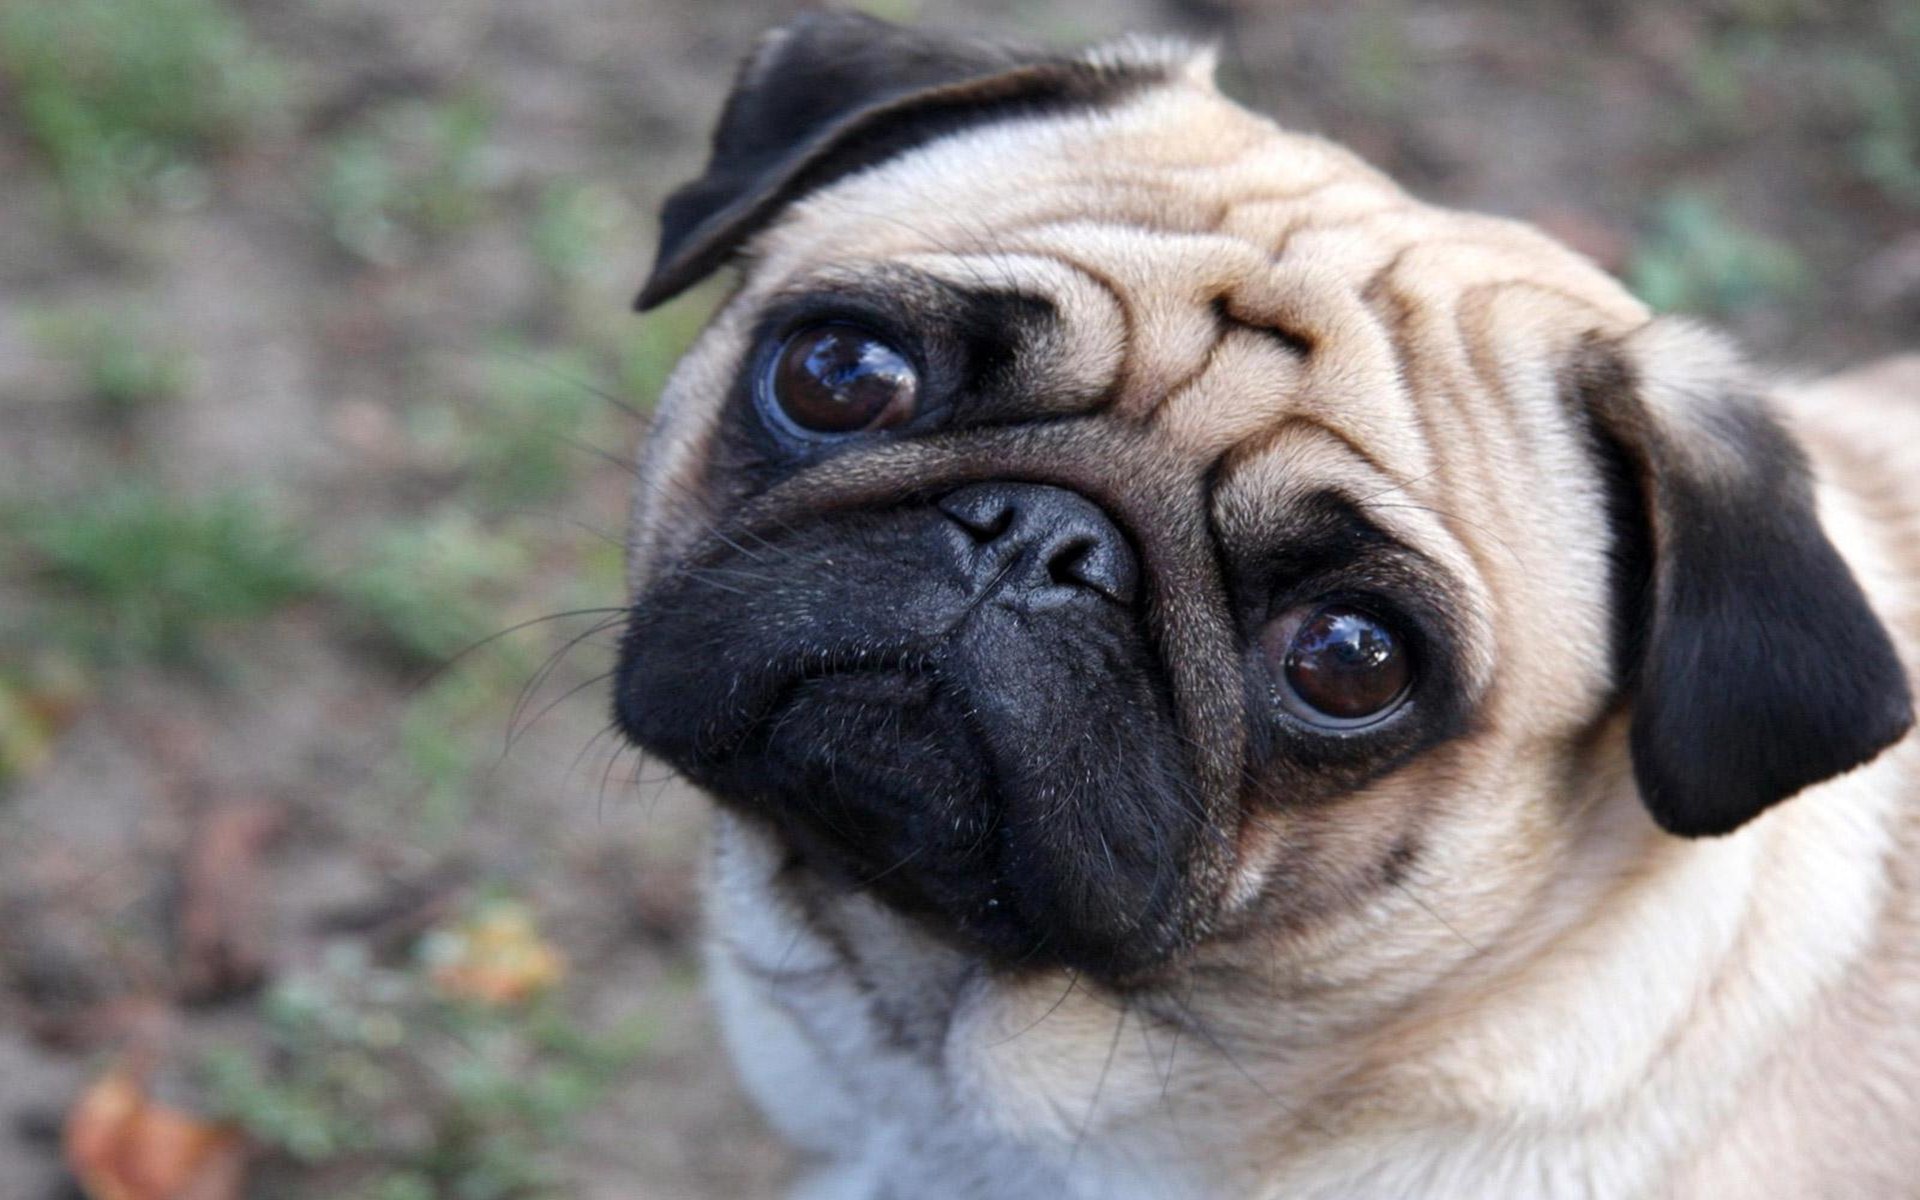 Cute Pug Photos HD Wallpaper Image Pictures